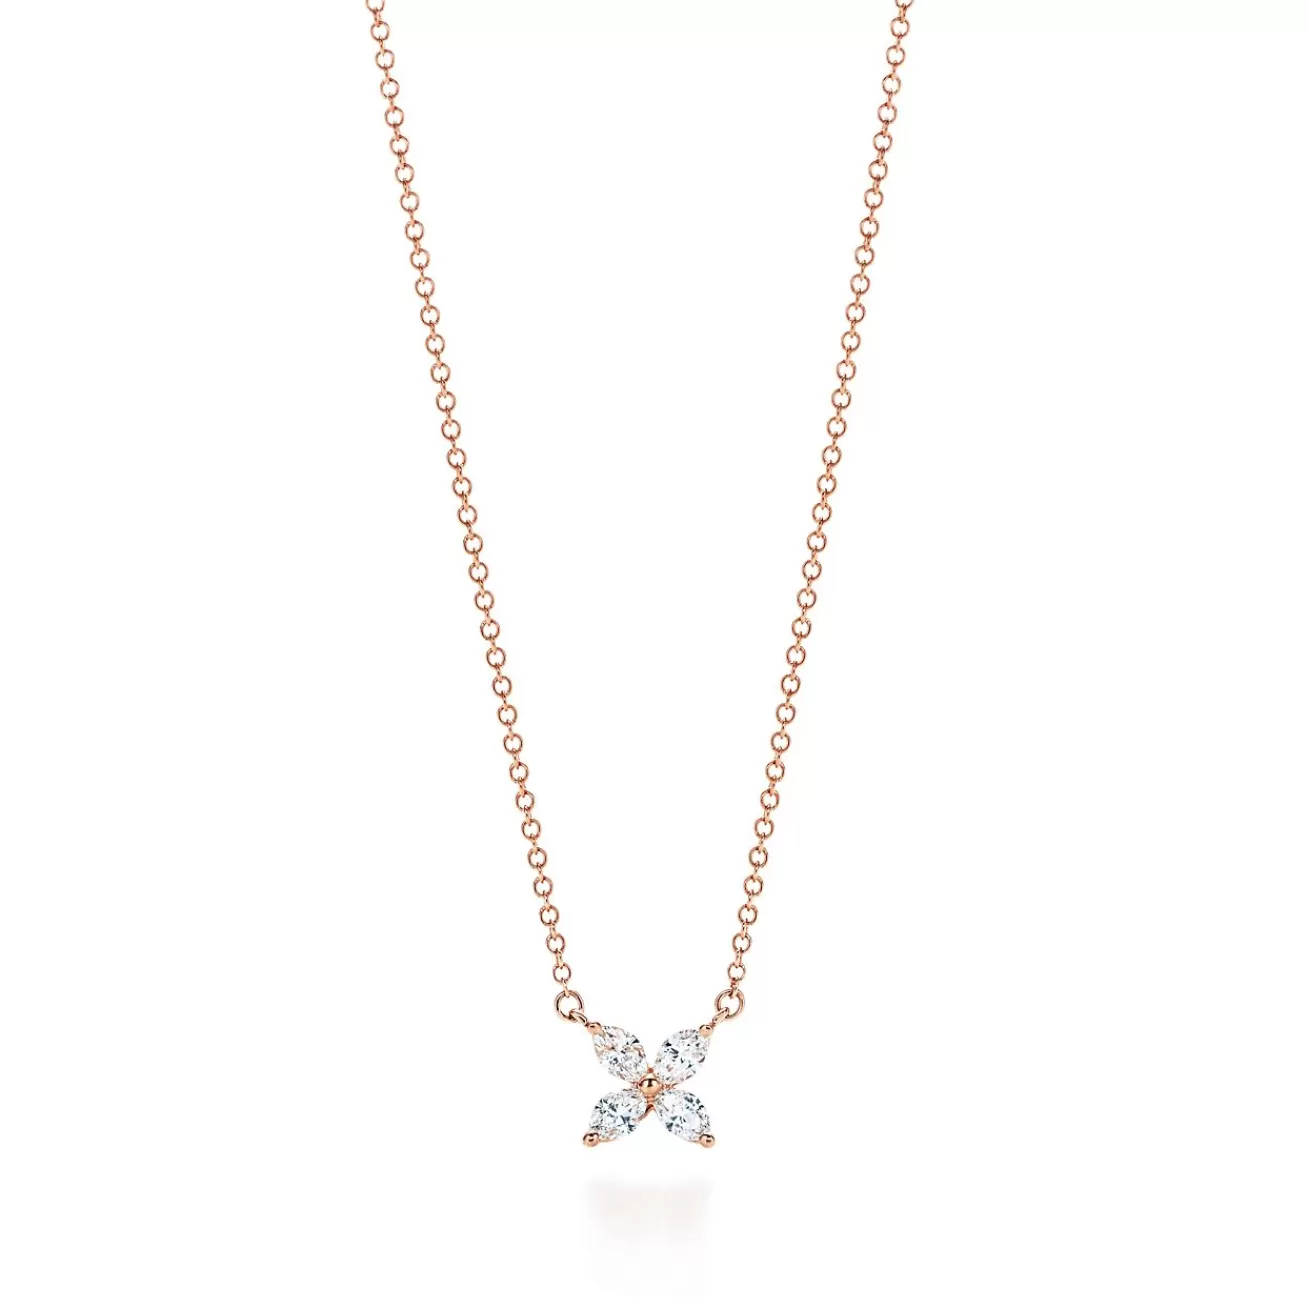 Tiffany & Co. Tiffany Victoria® pendant in 18k rose gold with diamonds, small. | ^ Necklaces & Pendants | Gifts for Her